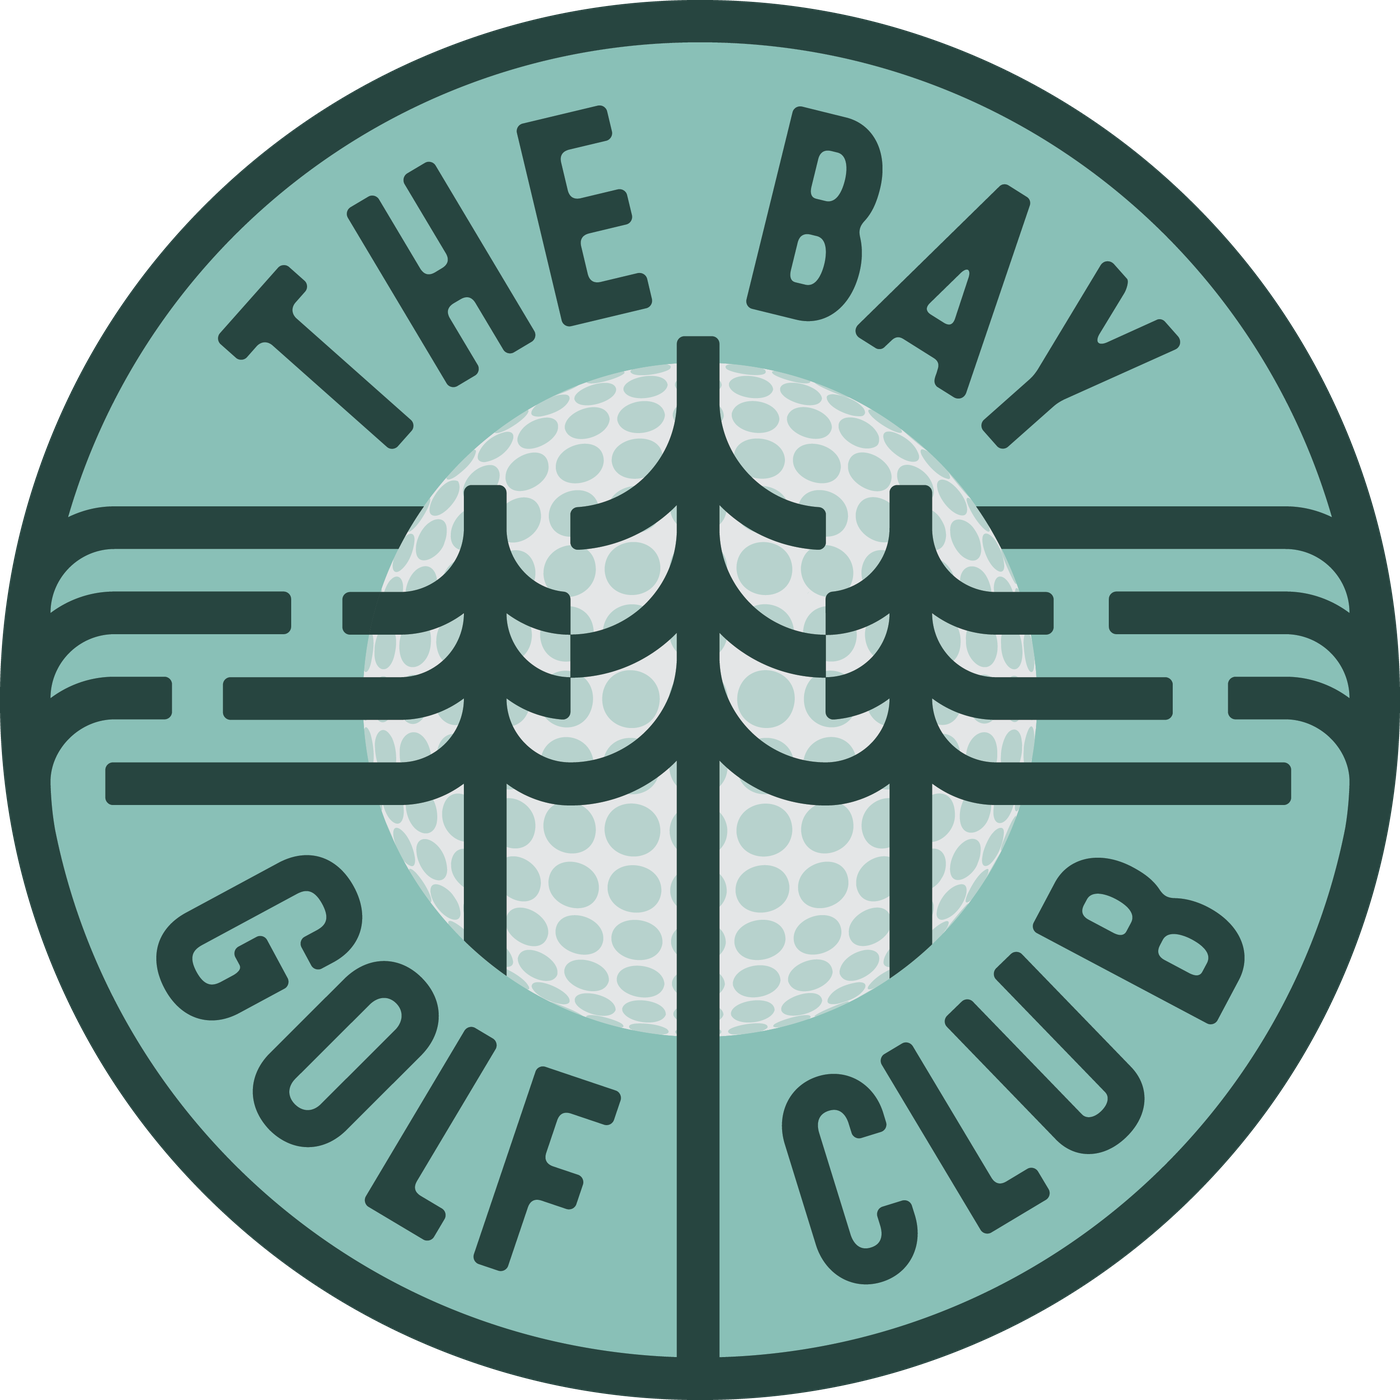 tgl: tiger and rory’s bay golf club announced, completing 6th and final team